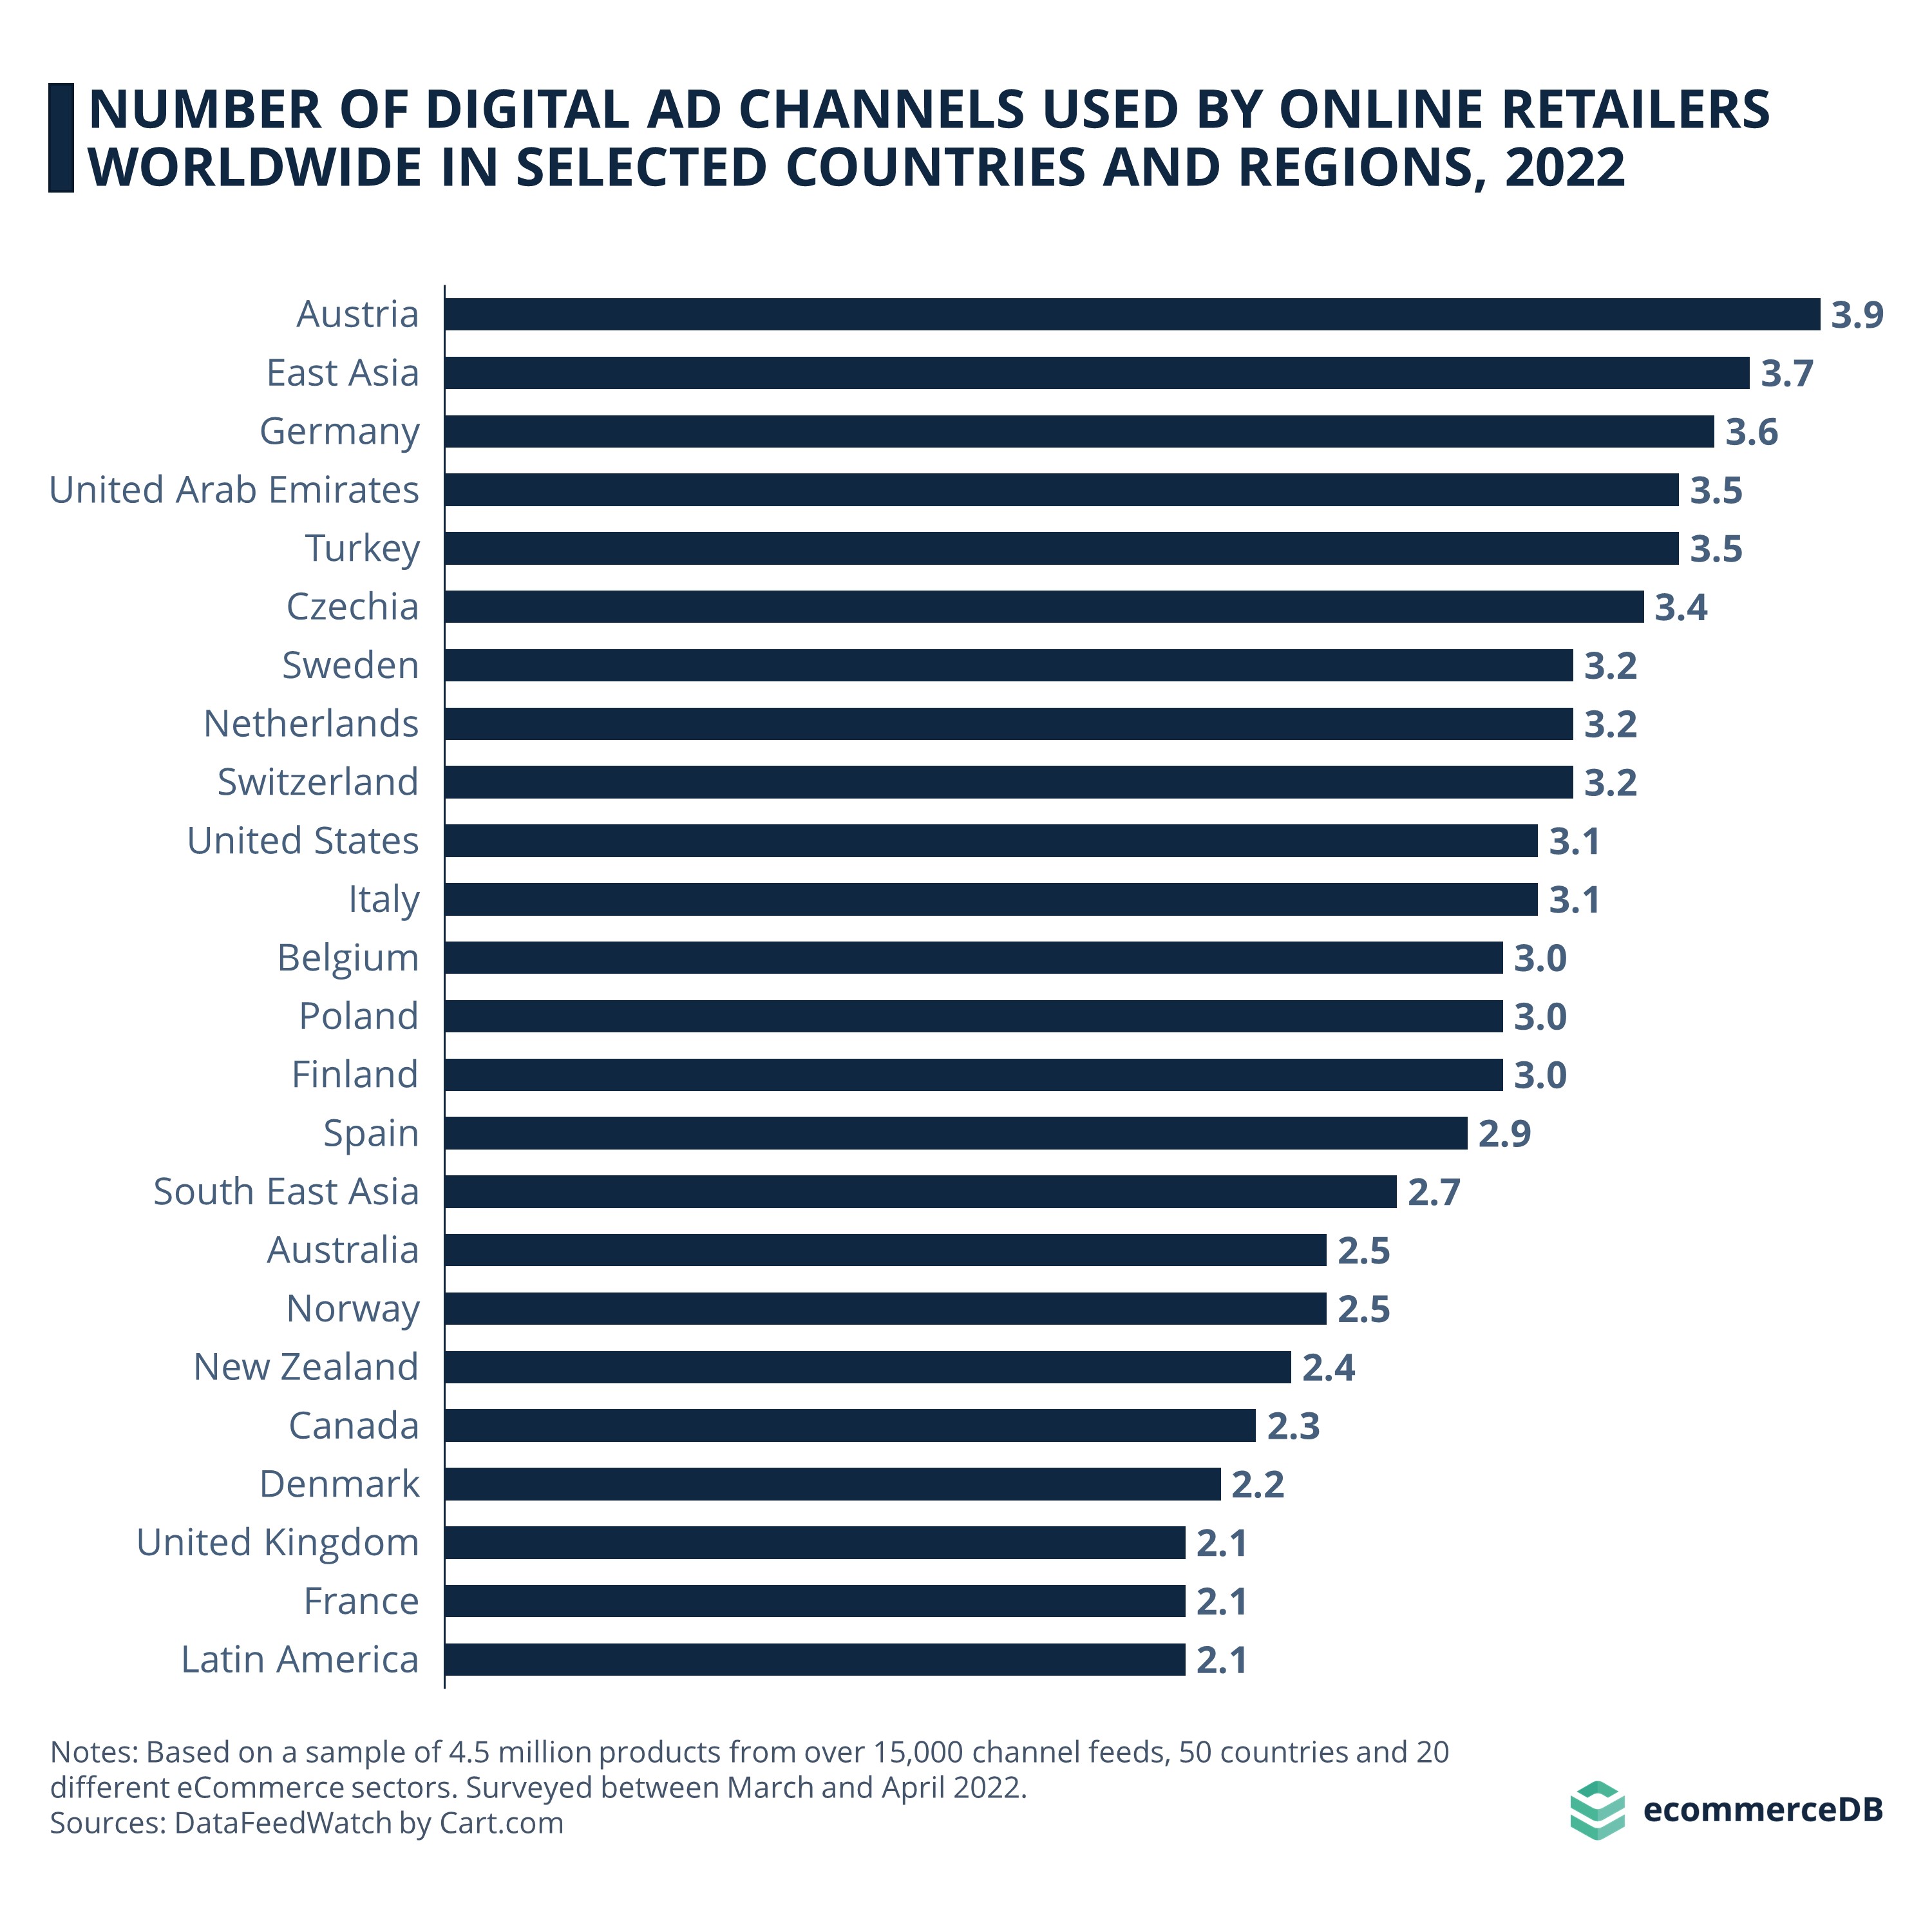 Number of Digital Ad Channels used by Online Retailers Worldwide in Selected Countries and Regions, 2022